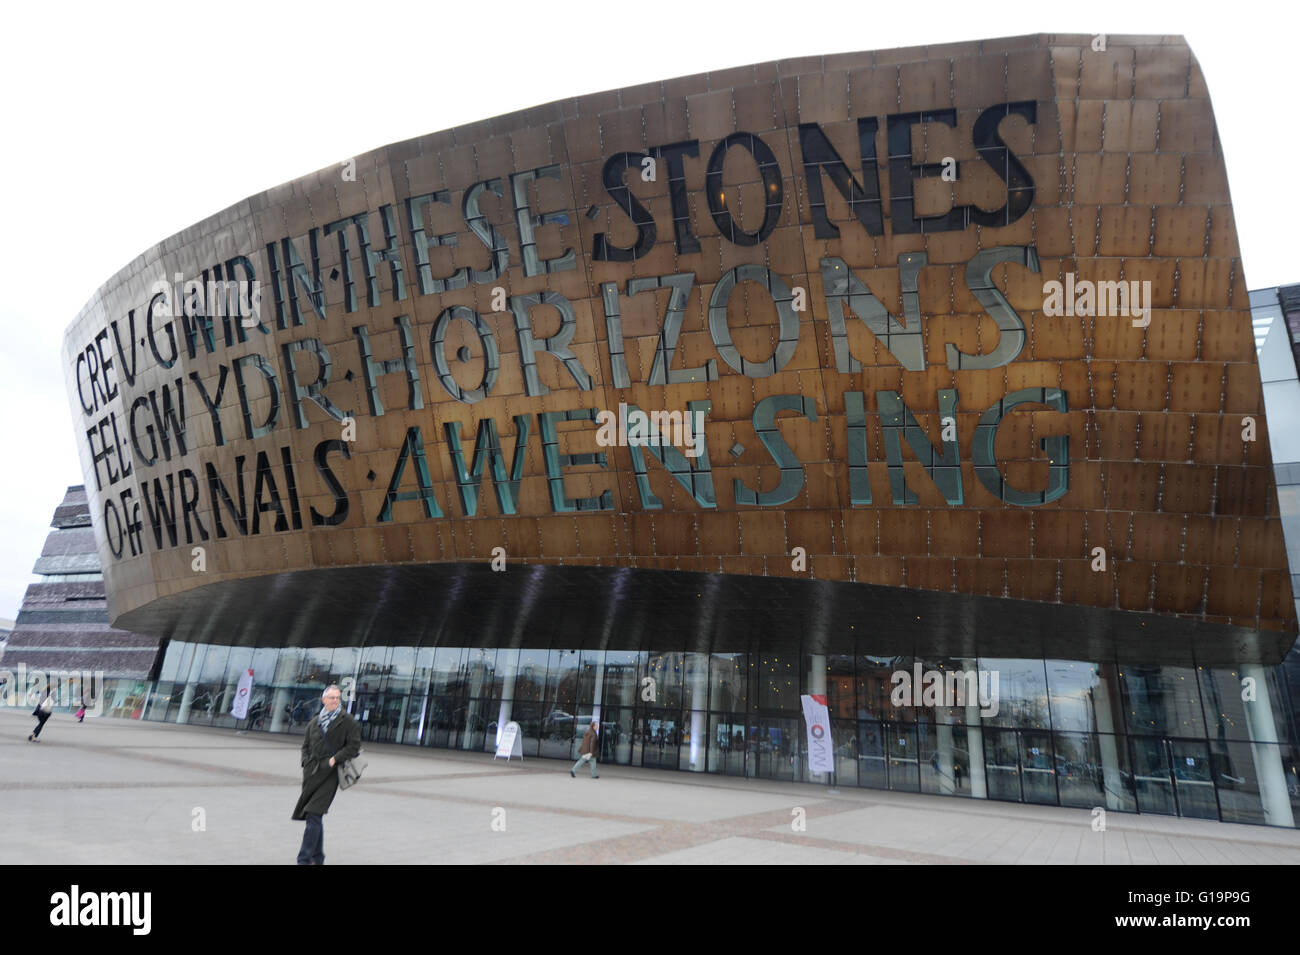 Wales Millennium Centre in Cardiff Stock Photo